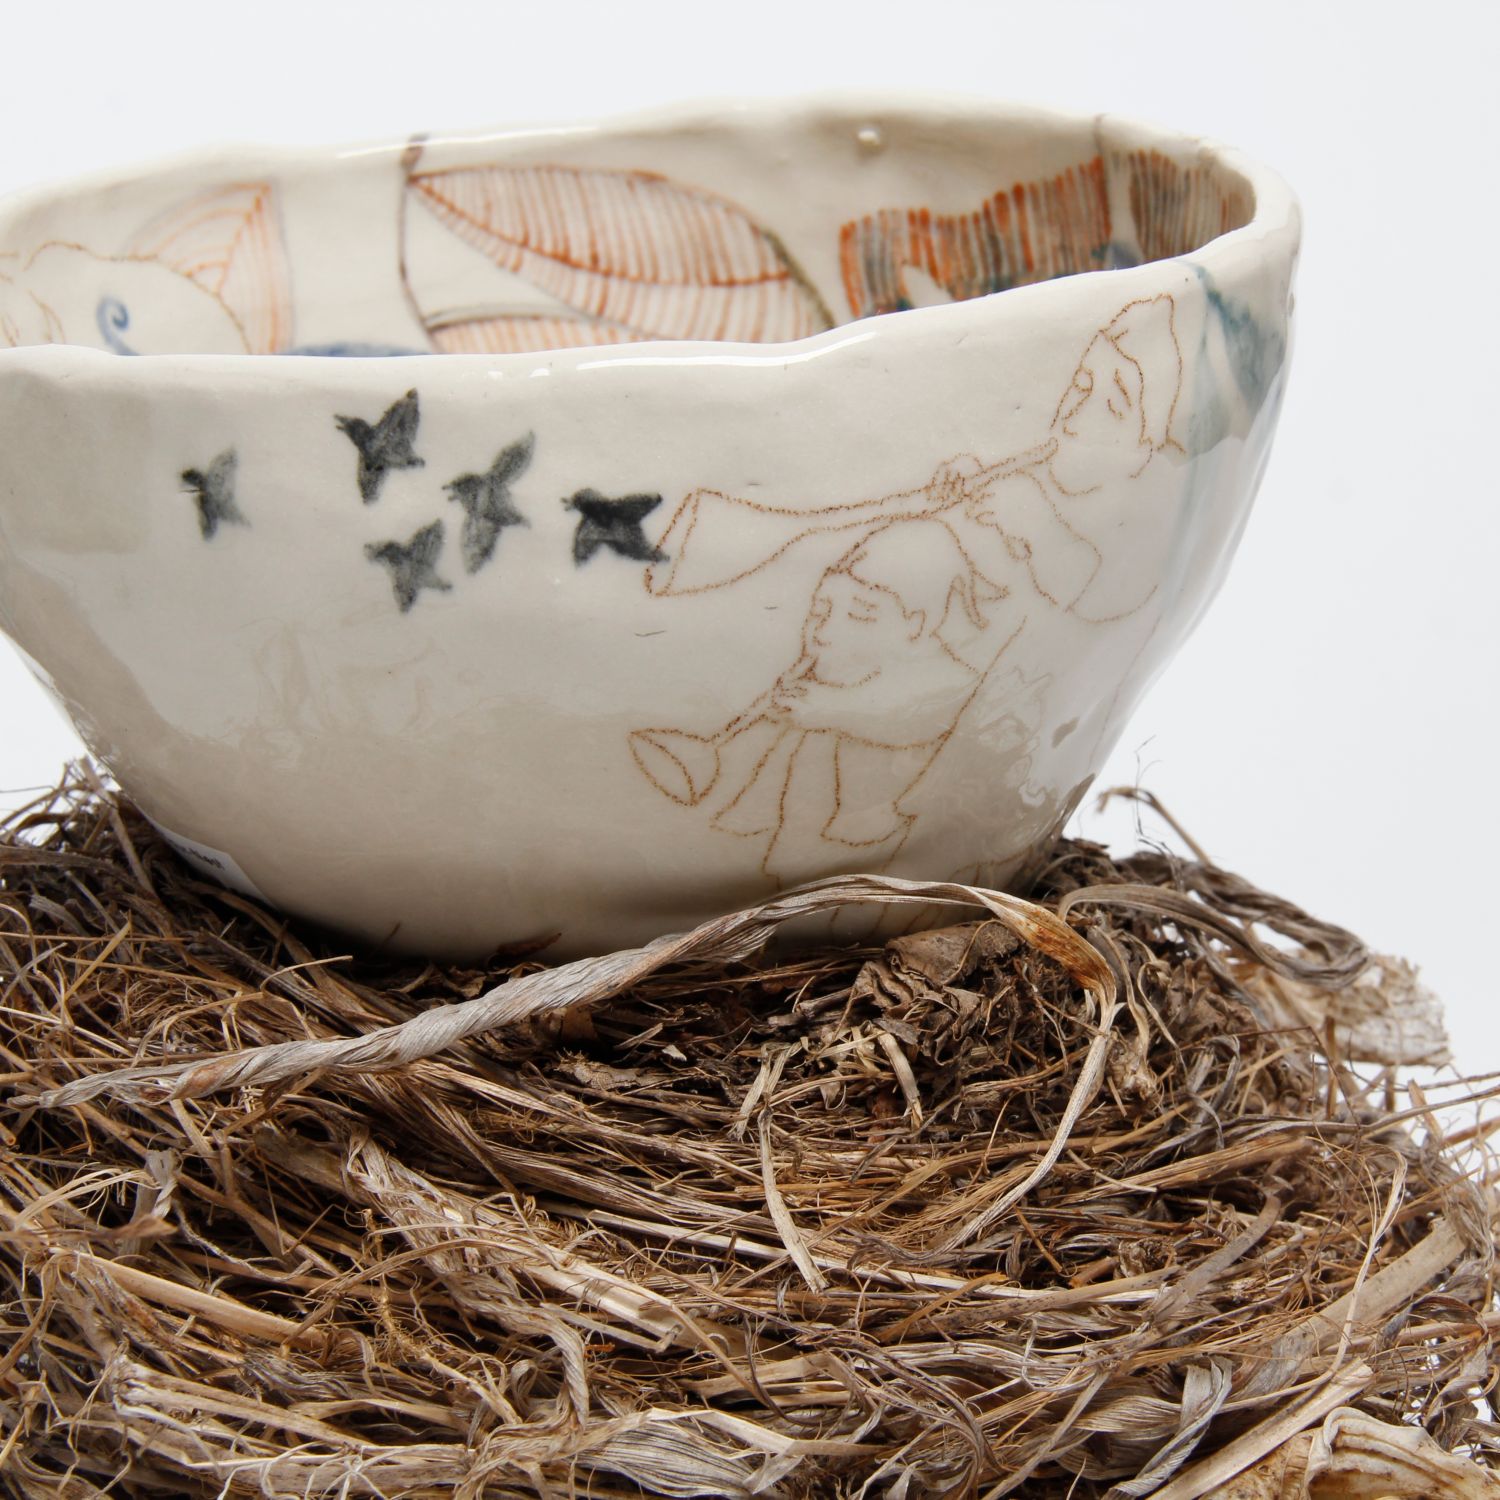 Japneet Kaur: Nesting Bowl – Hollow Bowl (Each sold separately) Product Image 3 of 7